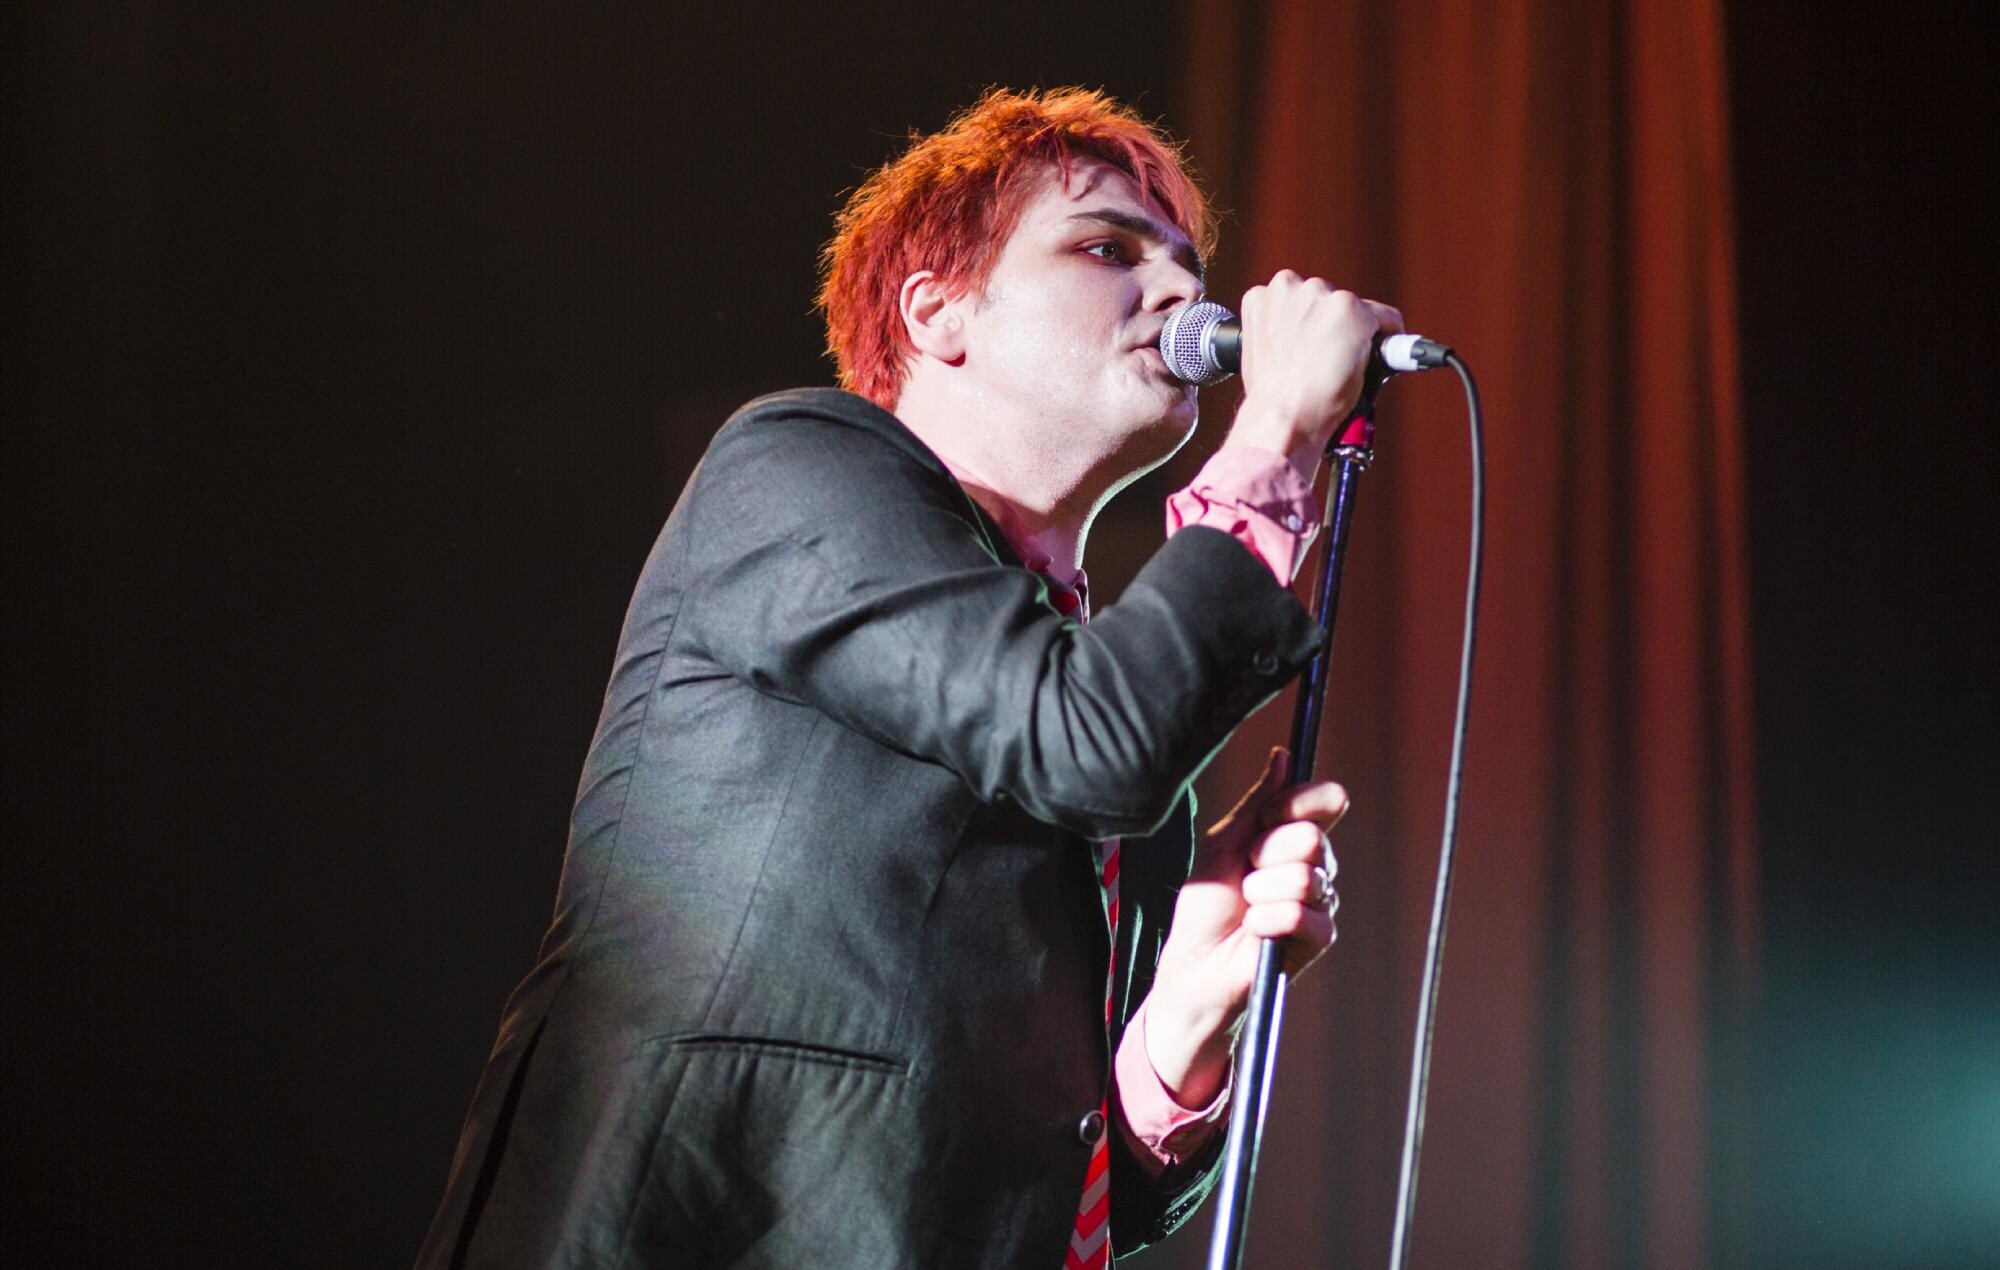 Gerard Way: My Chemical Romance, An American singer, songwriter, and comic book writer. 2000x1270 HD Background.